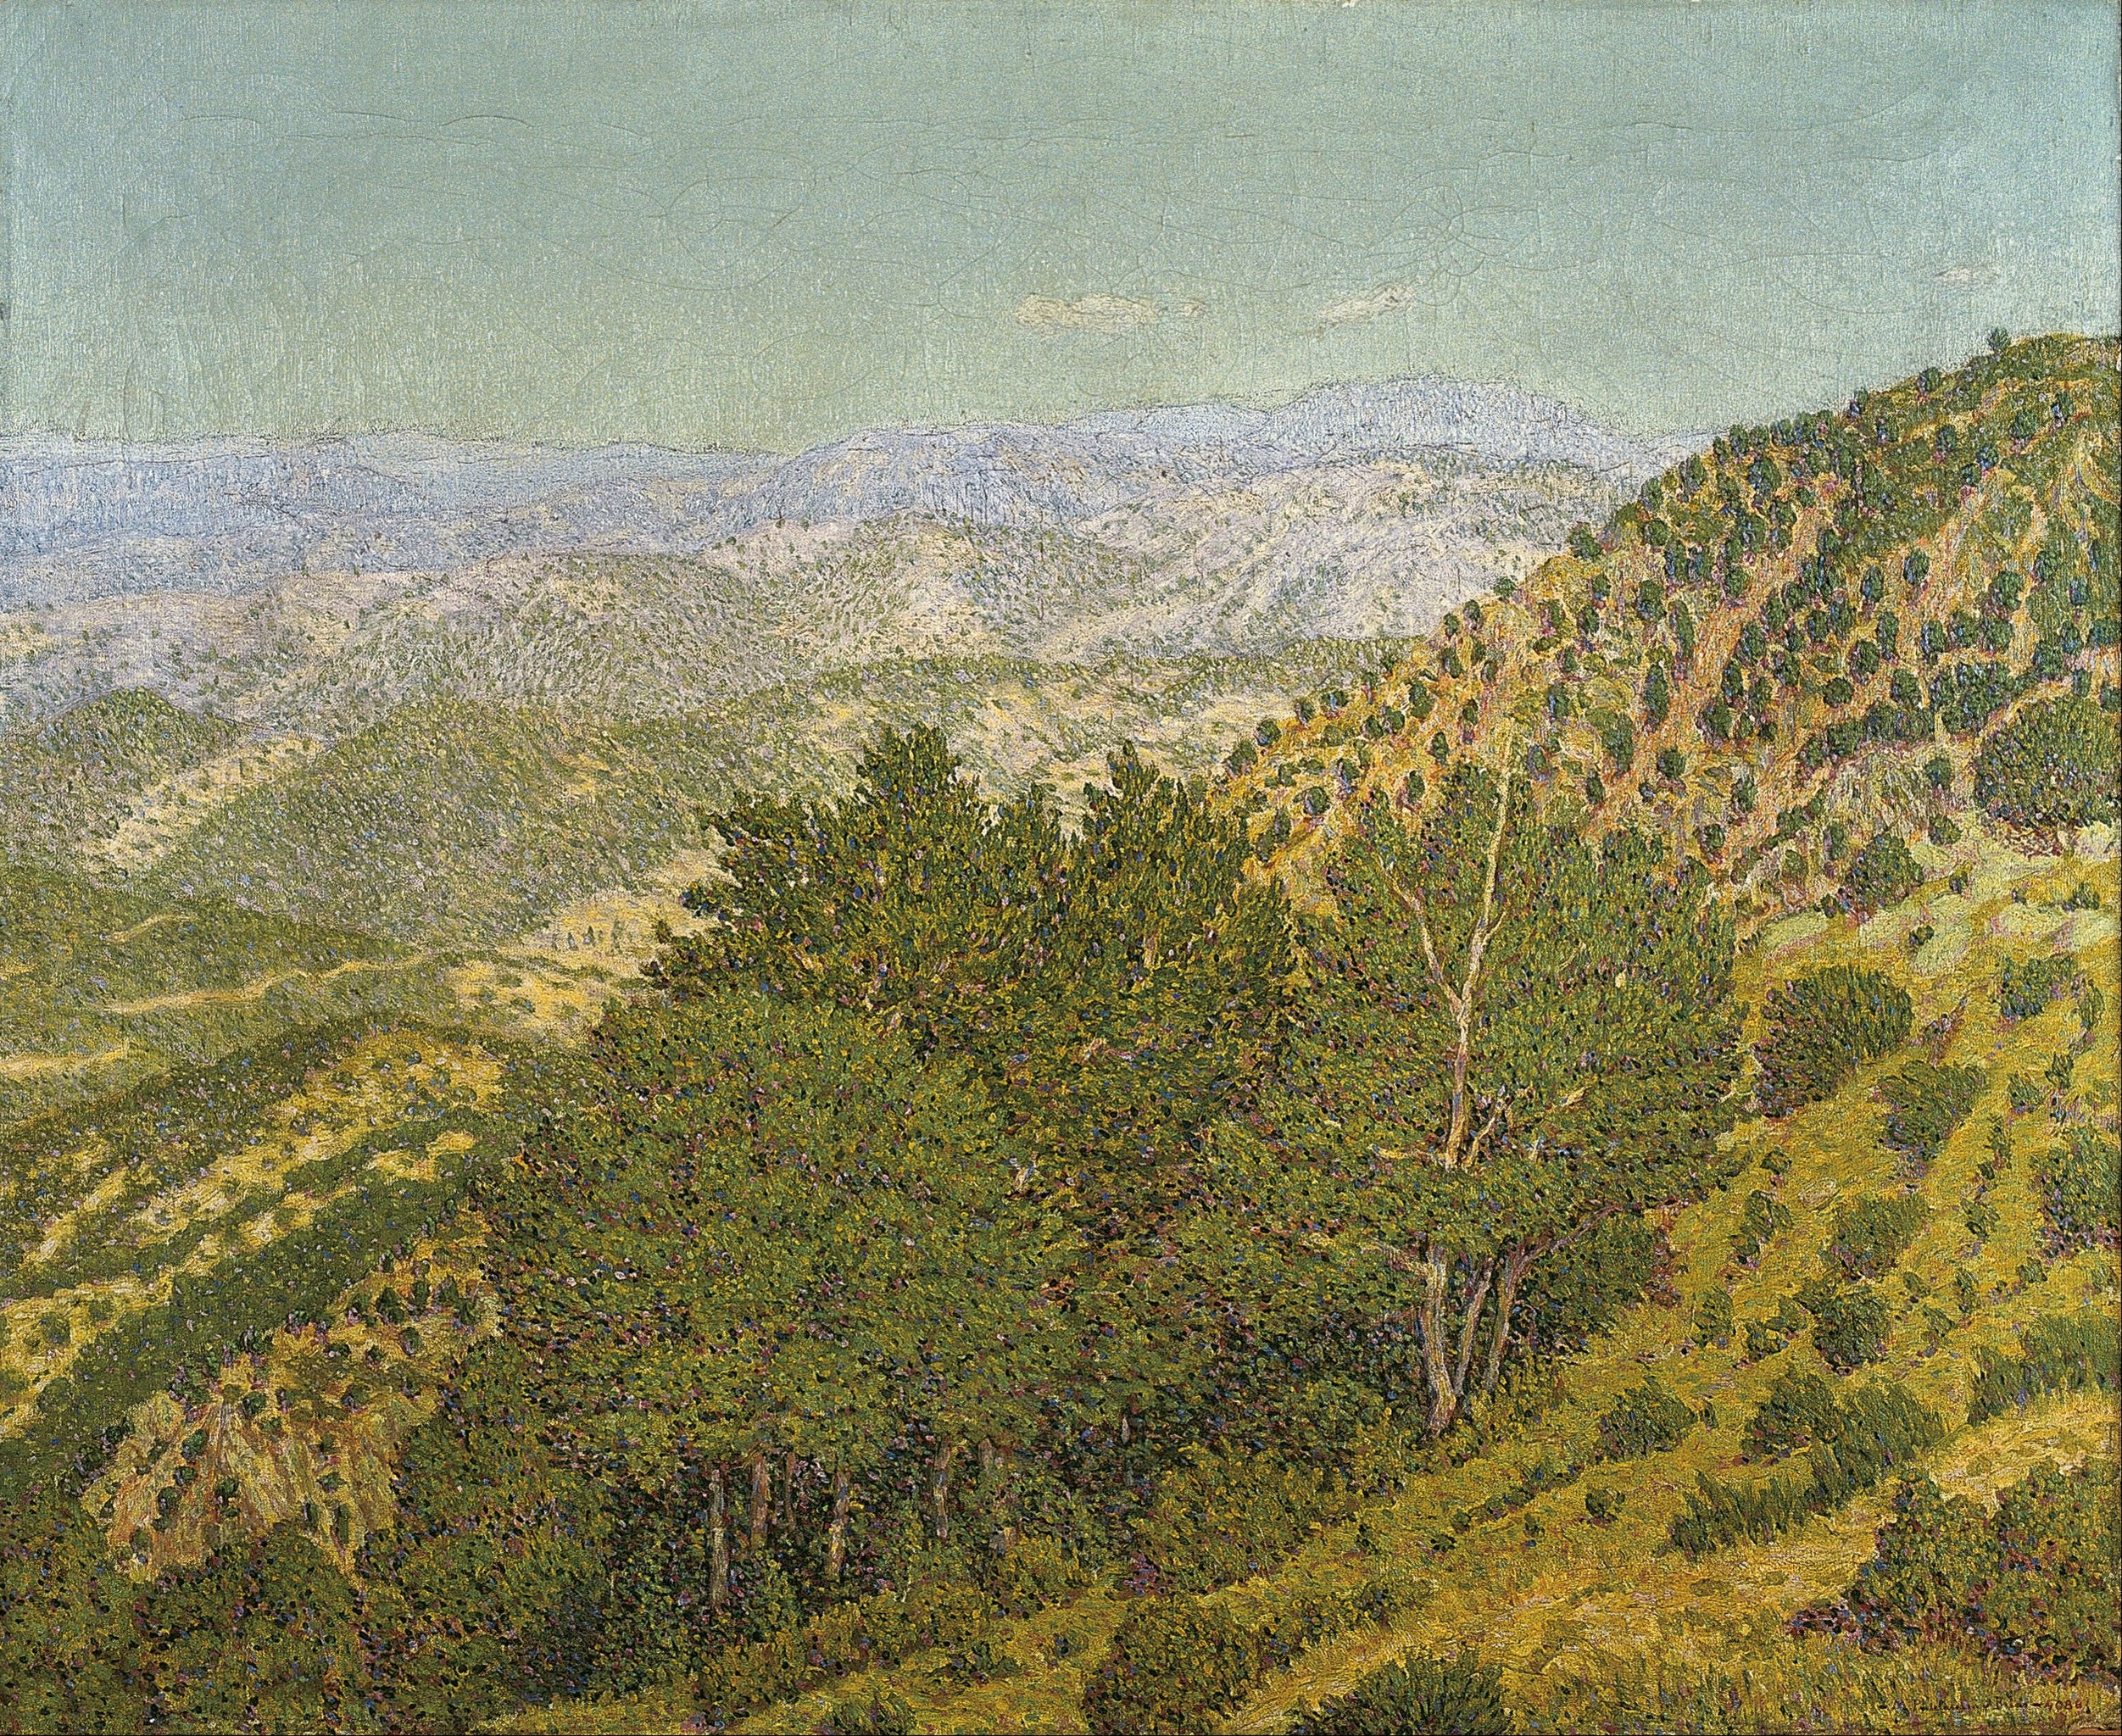 Mountains from Montseny. A Calm Day in the Morning by Marià Pidelaserra - 1903 - 70.5 x 85.5 cm Museu Nacional d'Art de Catalunya